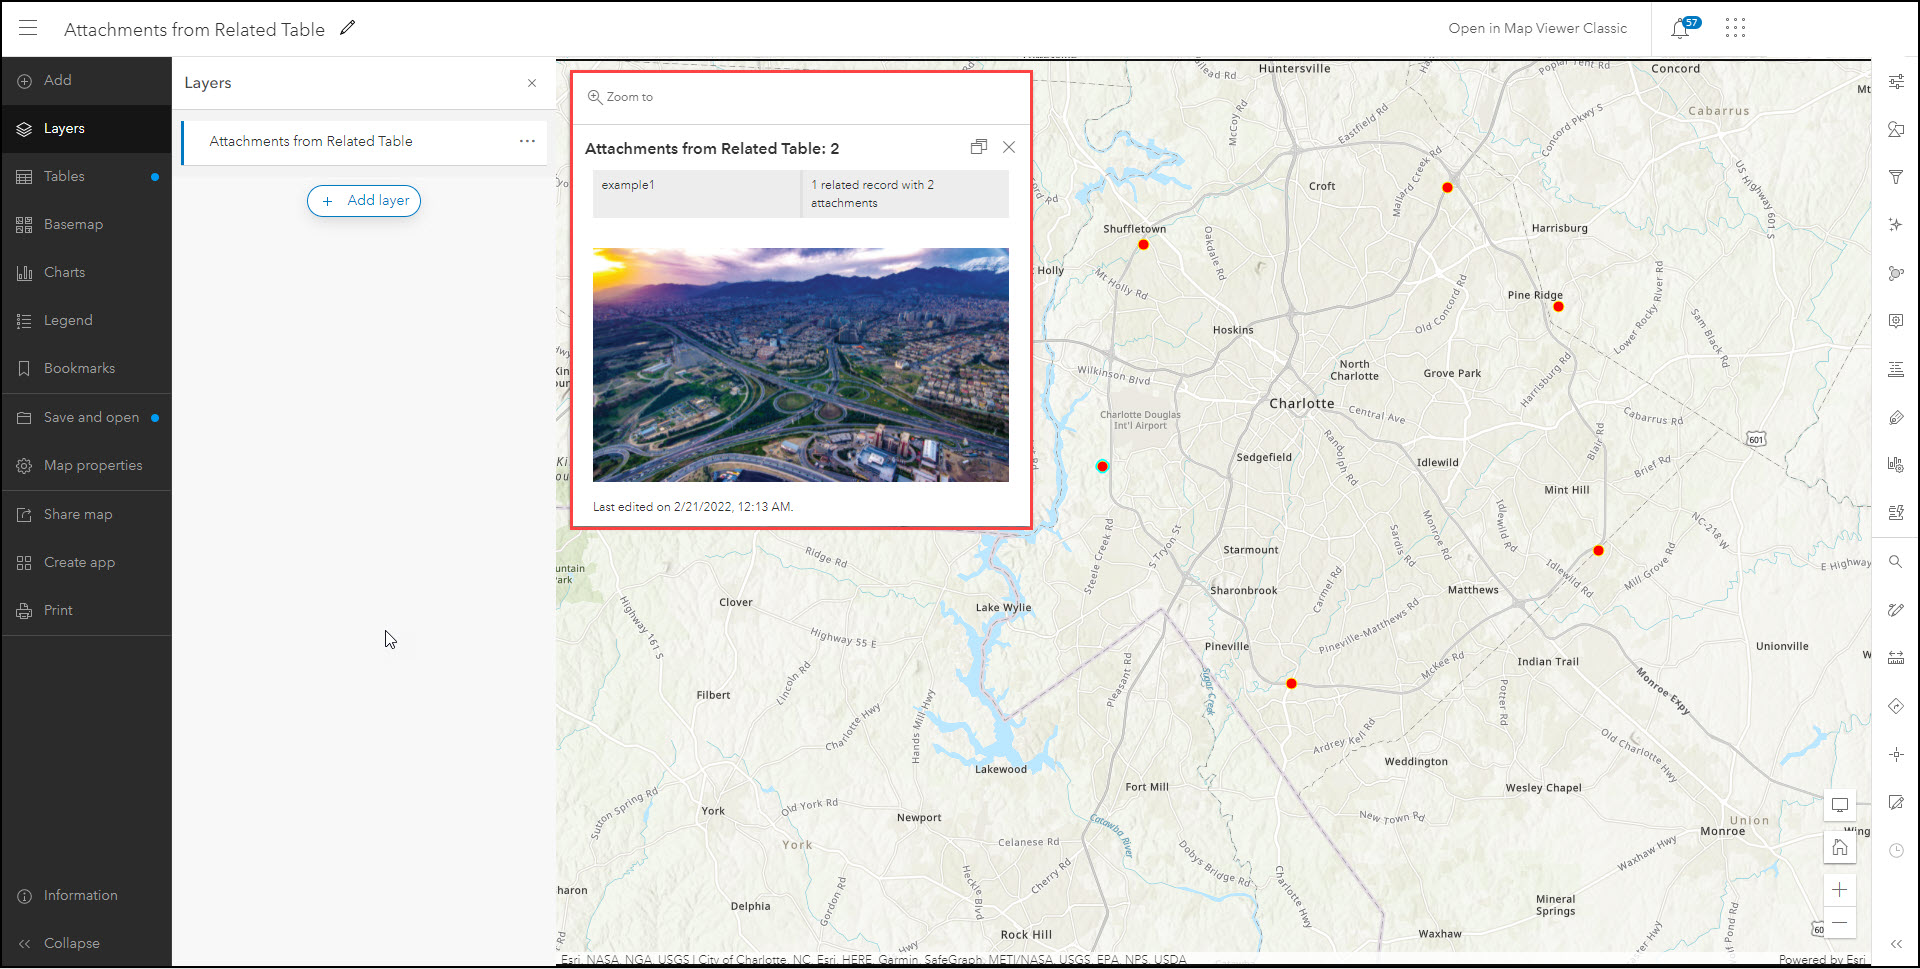 sample web map with image added in a pop-up